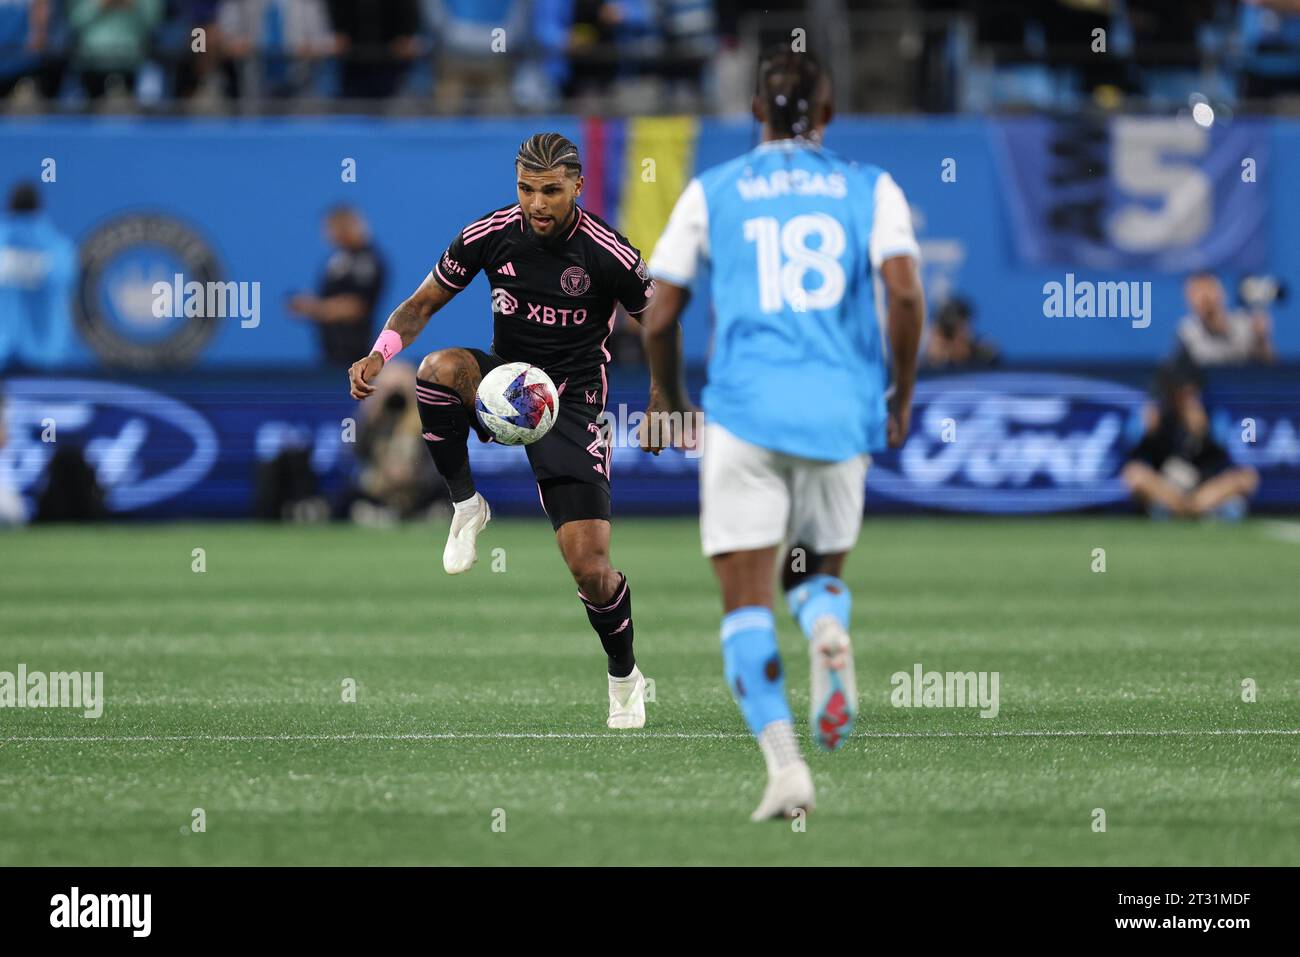 Charlotte, North Carolina, USA. 21st Oct, 2023. Inter Miami defender DeAndre Yedlin (2) looks to make a move during the MLS soccer match between Inter Miami CF and Charlotte FC at Bank of America Stadium in Charlotte, North Carolina. Greg Atkins/CSM/Alamy Live News Stock Photo